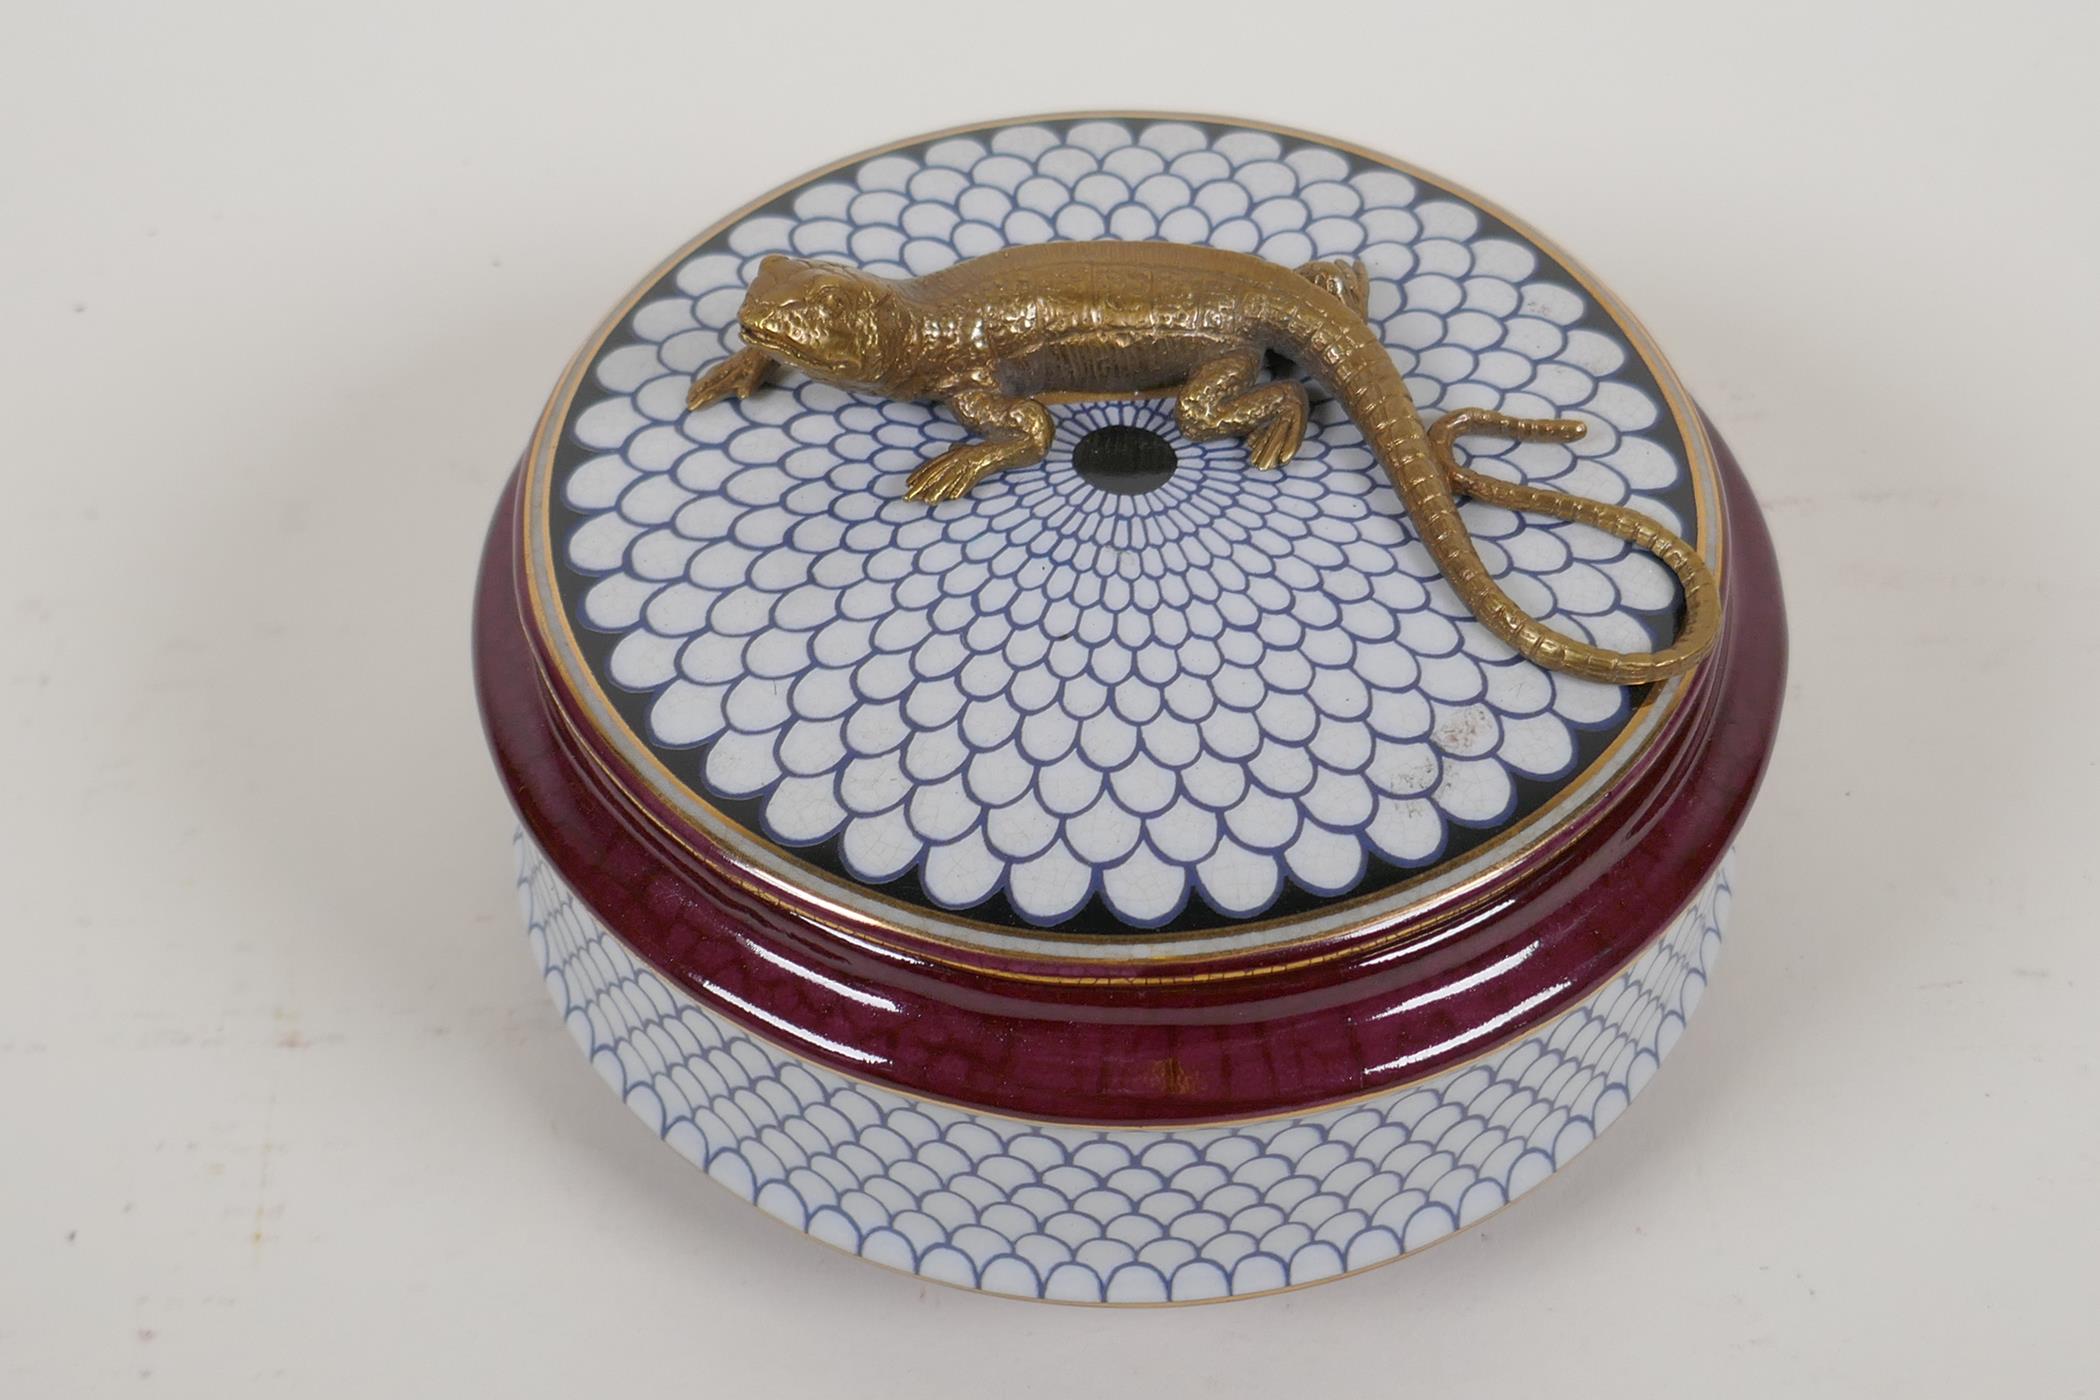 A porcelain trinket box, the cover with a bronzed figure of a lizard, 5½" diameter